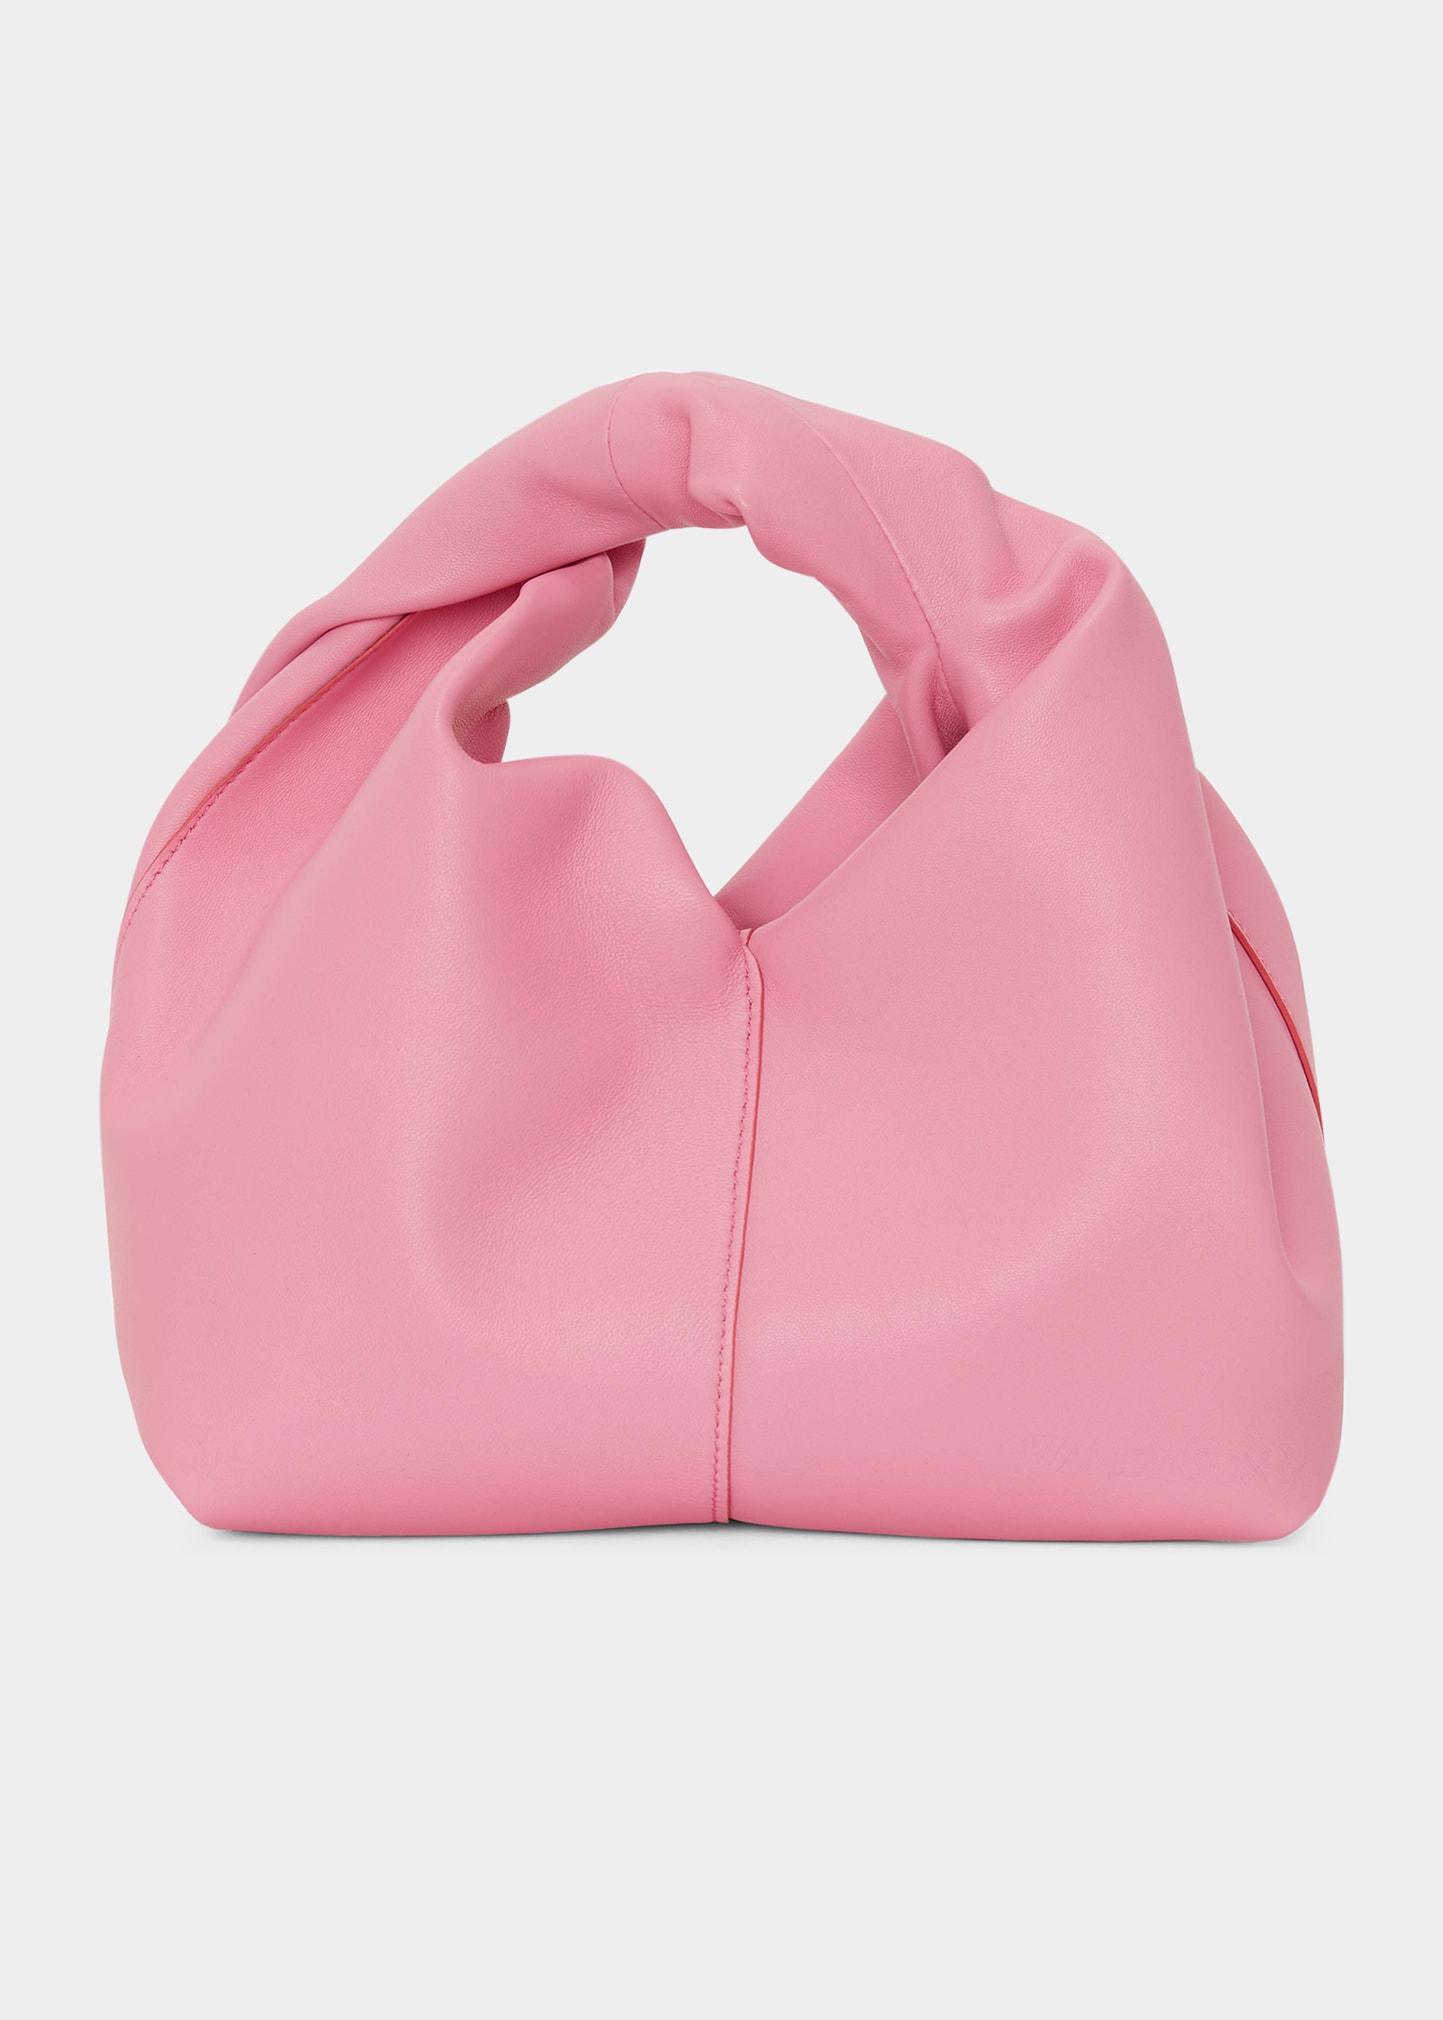 JW Anderson Twister Calf Leather Hobo Bag in Pink | Lyst